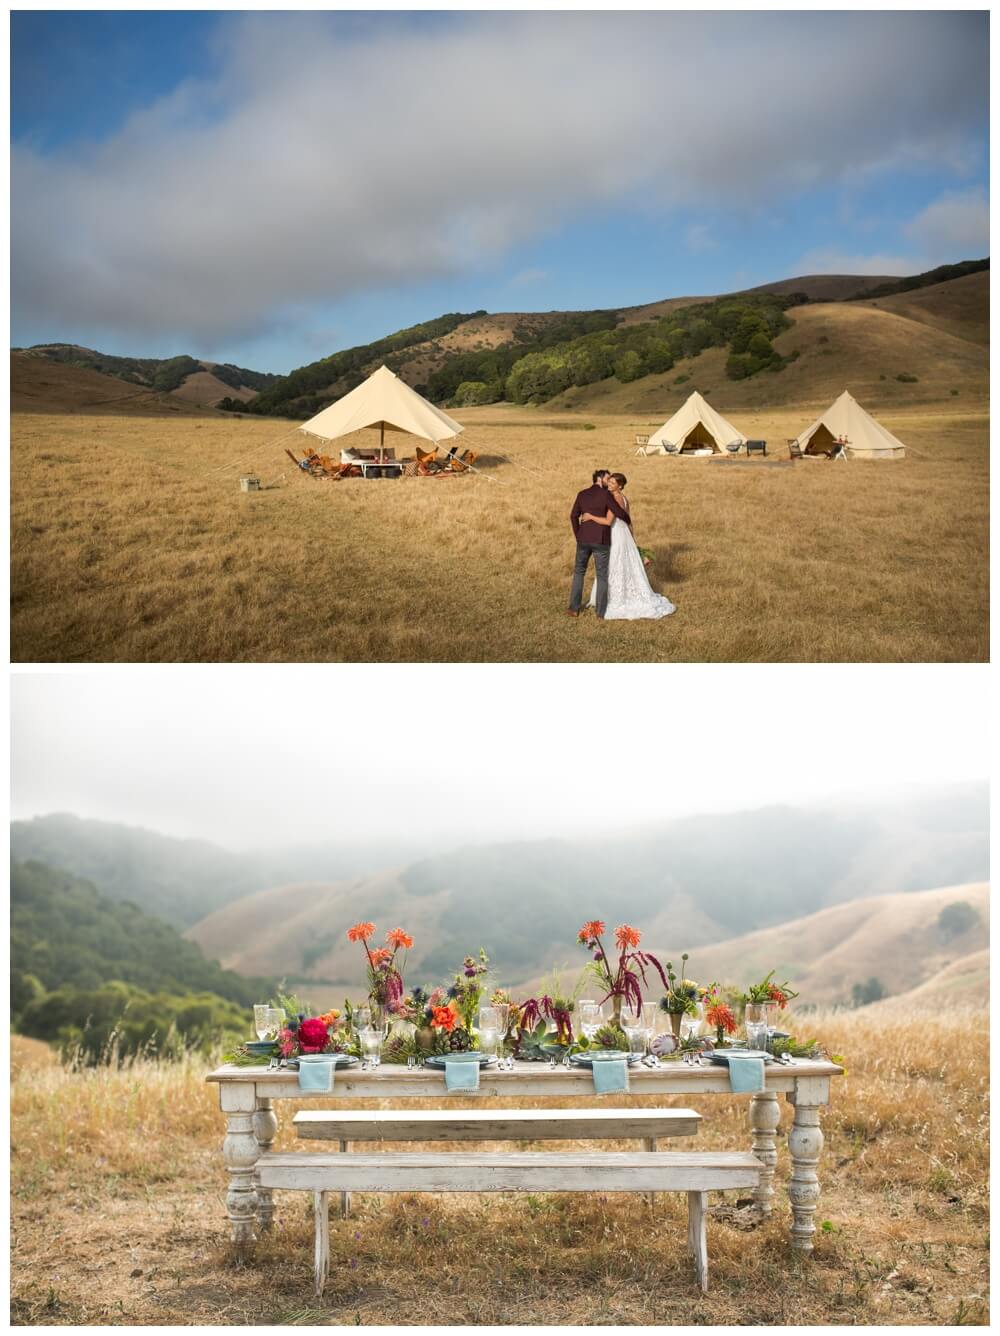 Field with multiple tents and a rustic table at a romantic bohemian wedding in Sonoma County